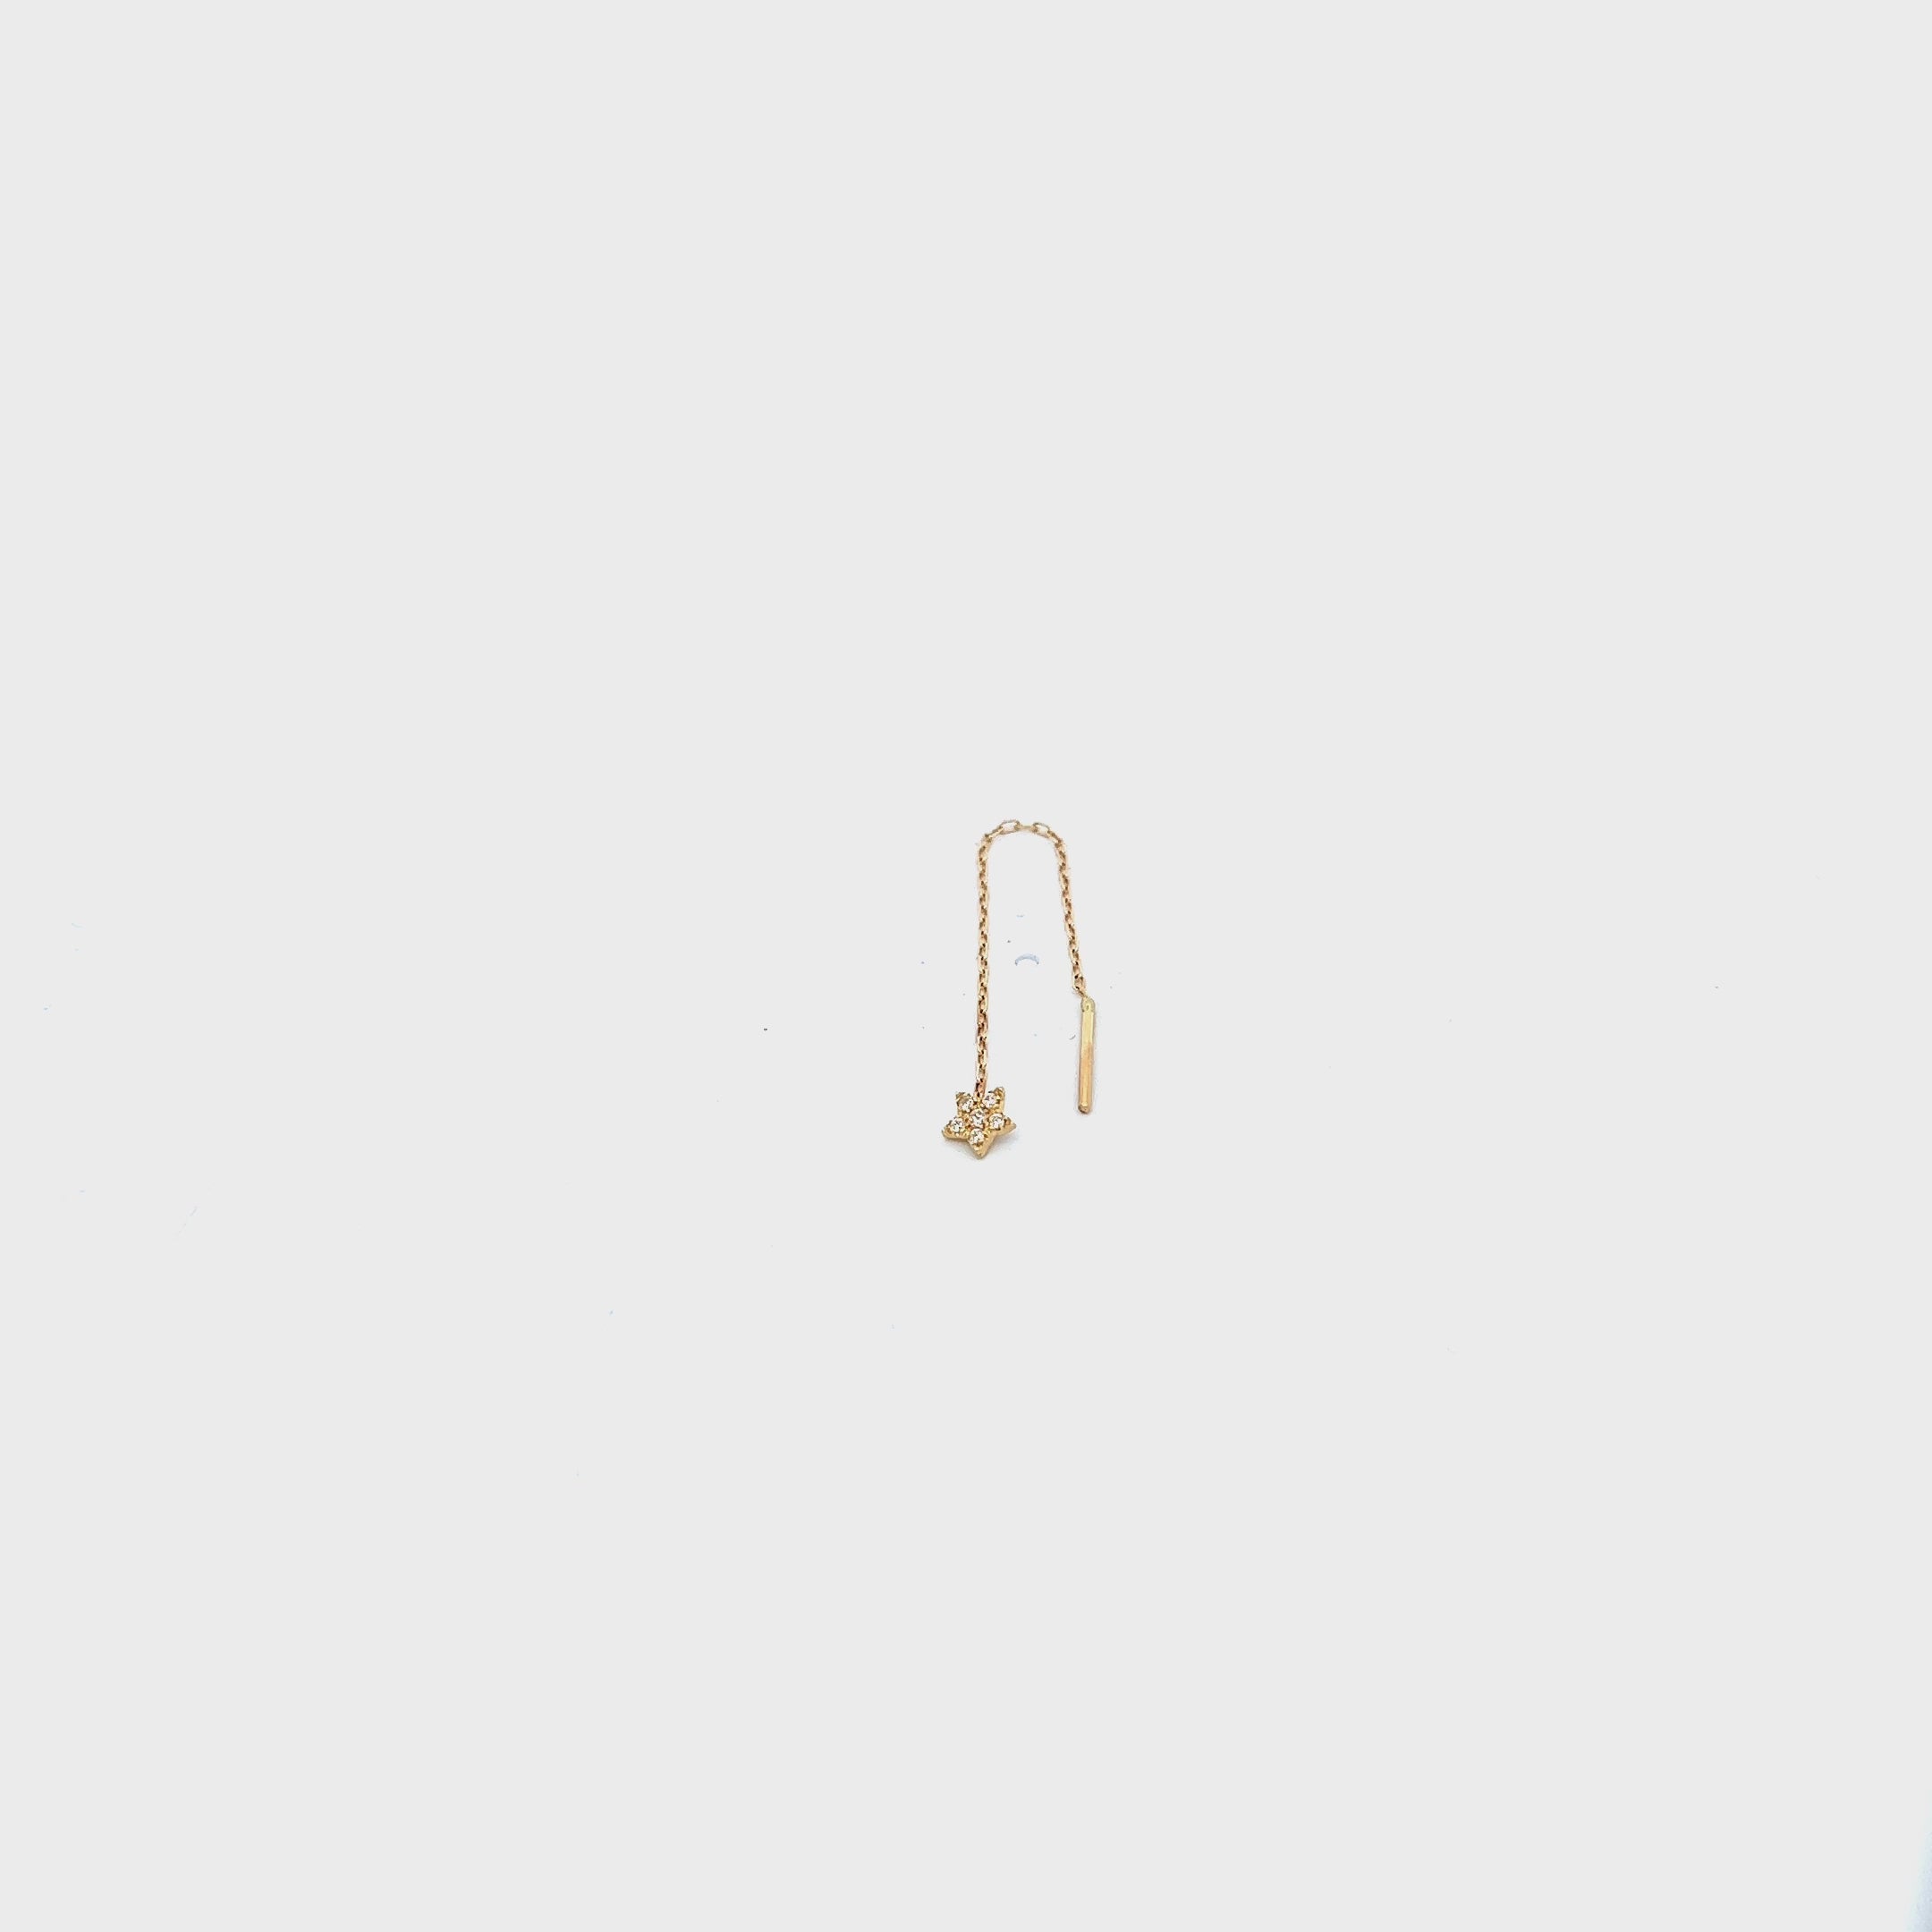 Earrings - Single Star Chain Earring and Lab Grown Diamonds - ORO18KT - thumbnail - video - 1 | Rue des Mille